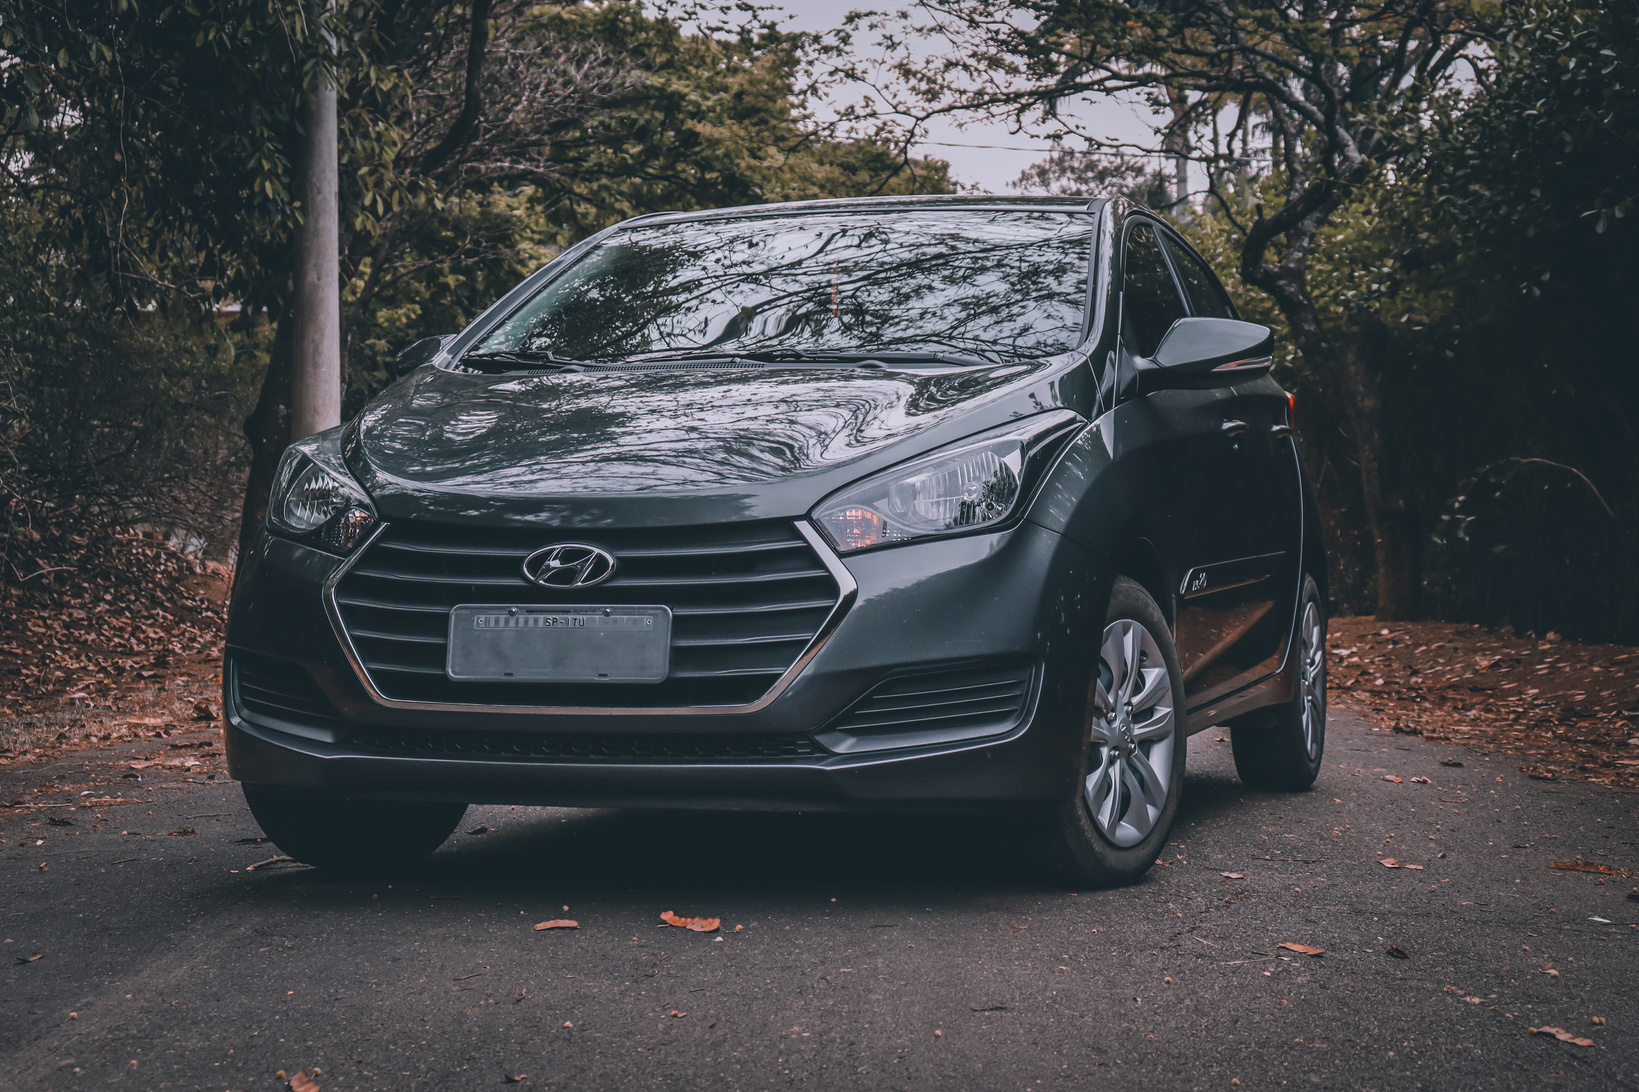 Black Hyundai Car Parked on the Road Between Trees